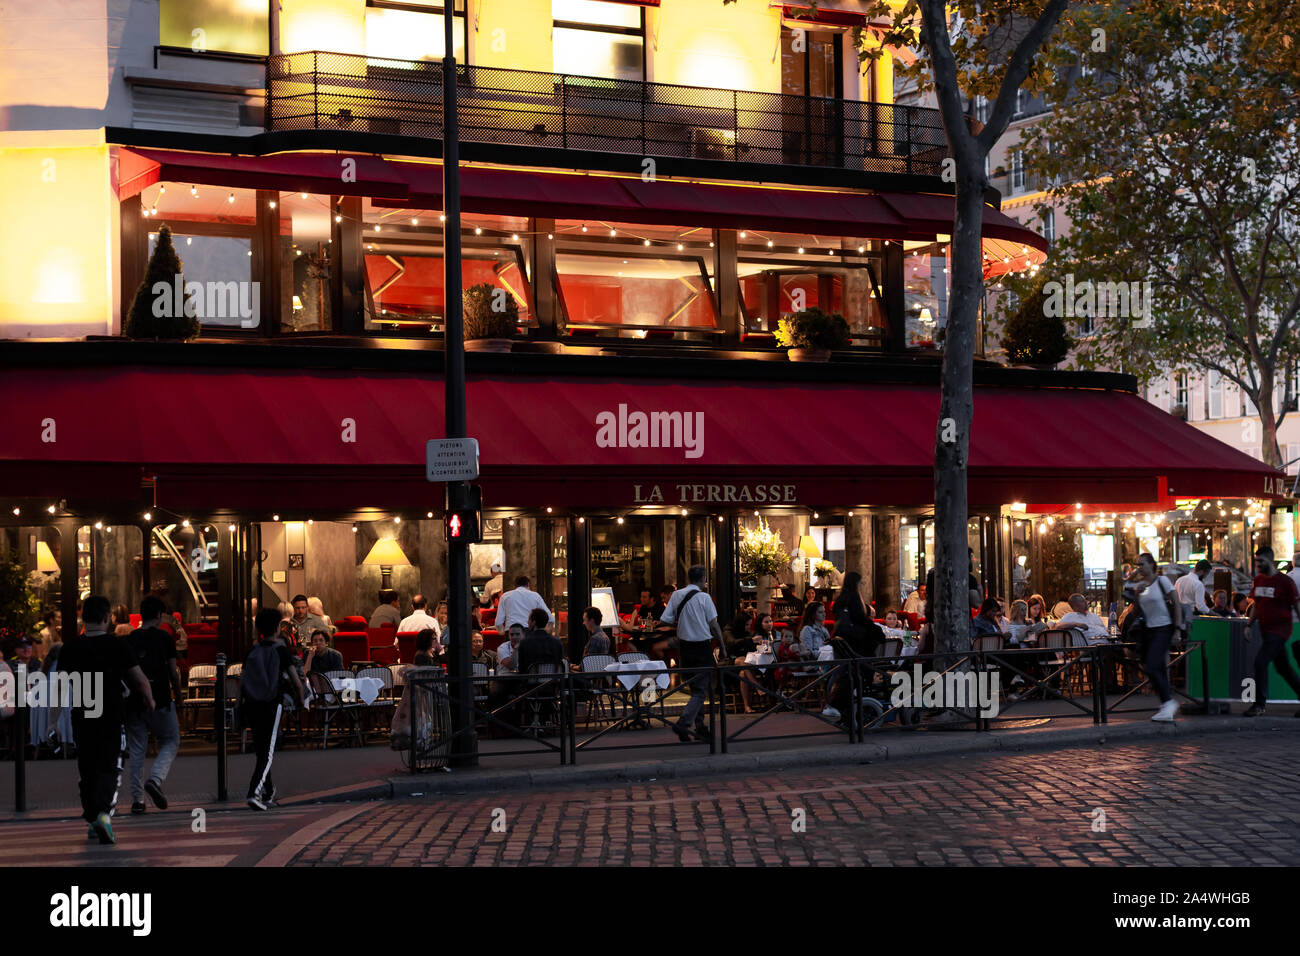 Cafes in Paris France. The Cafe Culture has been in existence in Paris since the 17th century. Stock Photo